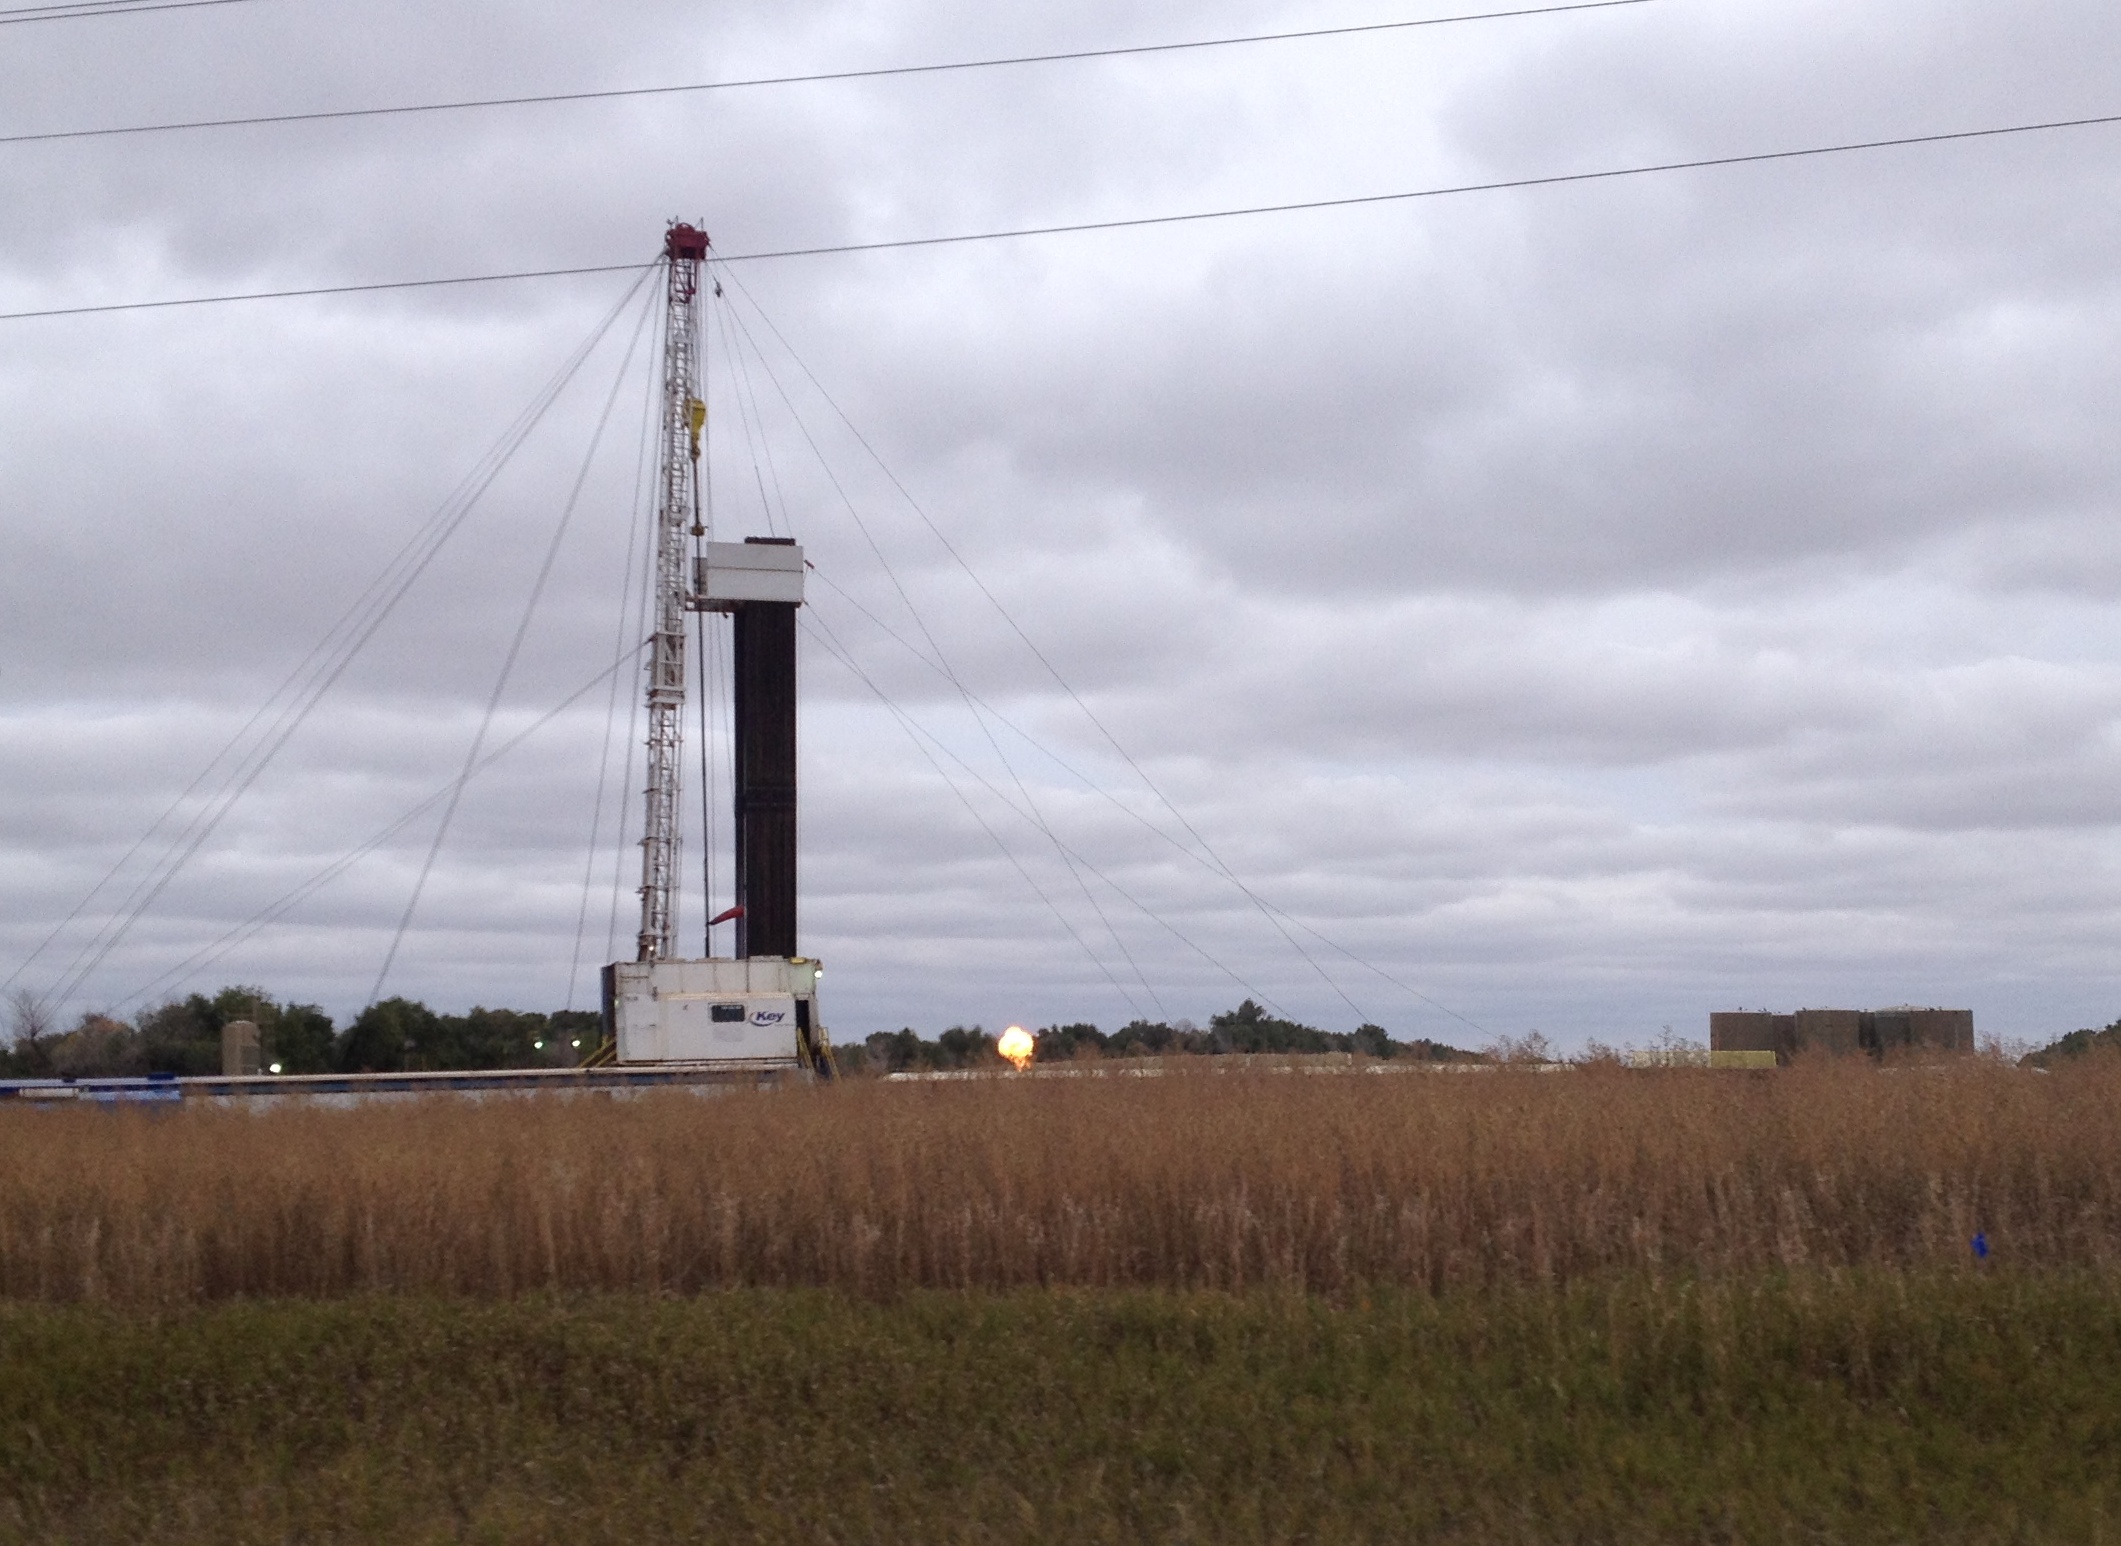 Drilling rig in North Dakota during October 2013 to go along with previous two pictures. Photo by James Ulvog. 